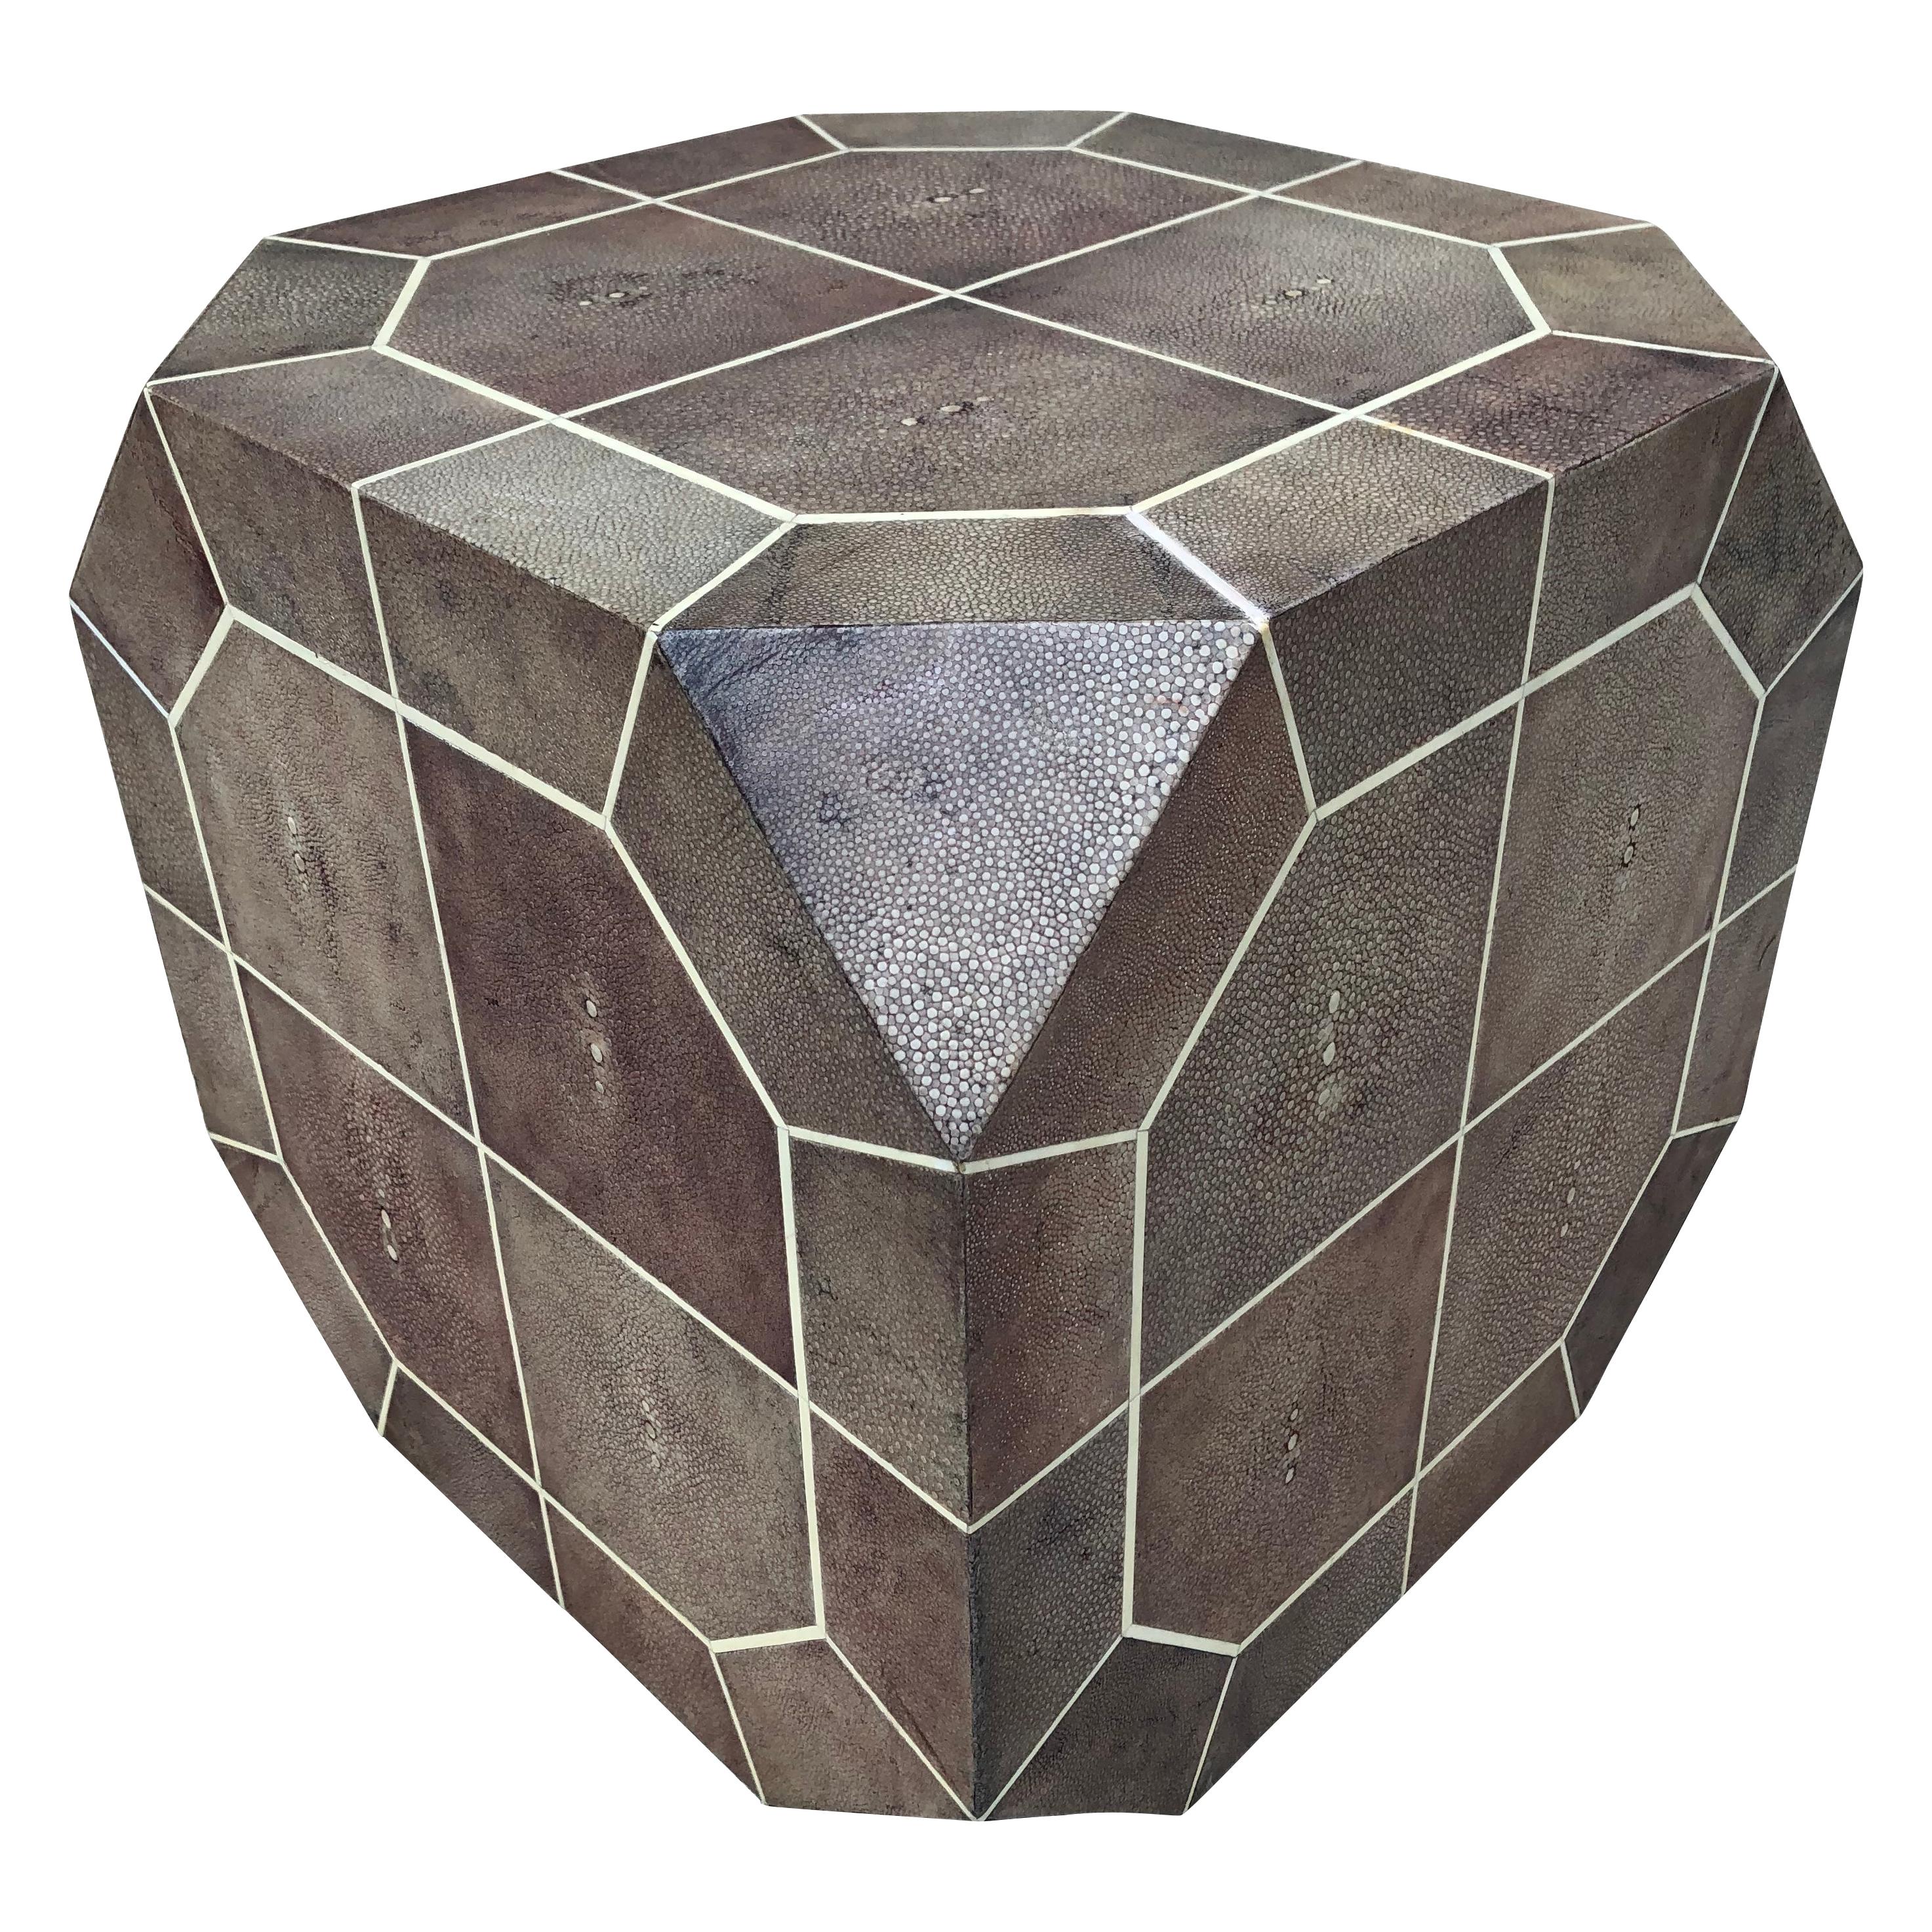 Ron Seff Shagreen Bone Inlaid Dice Shaped Table For Sale